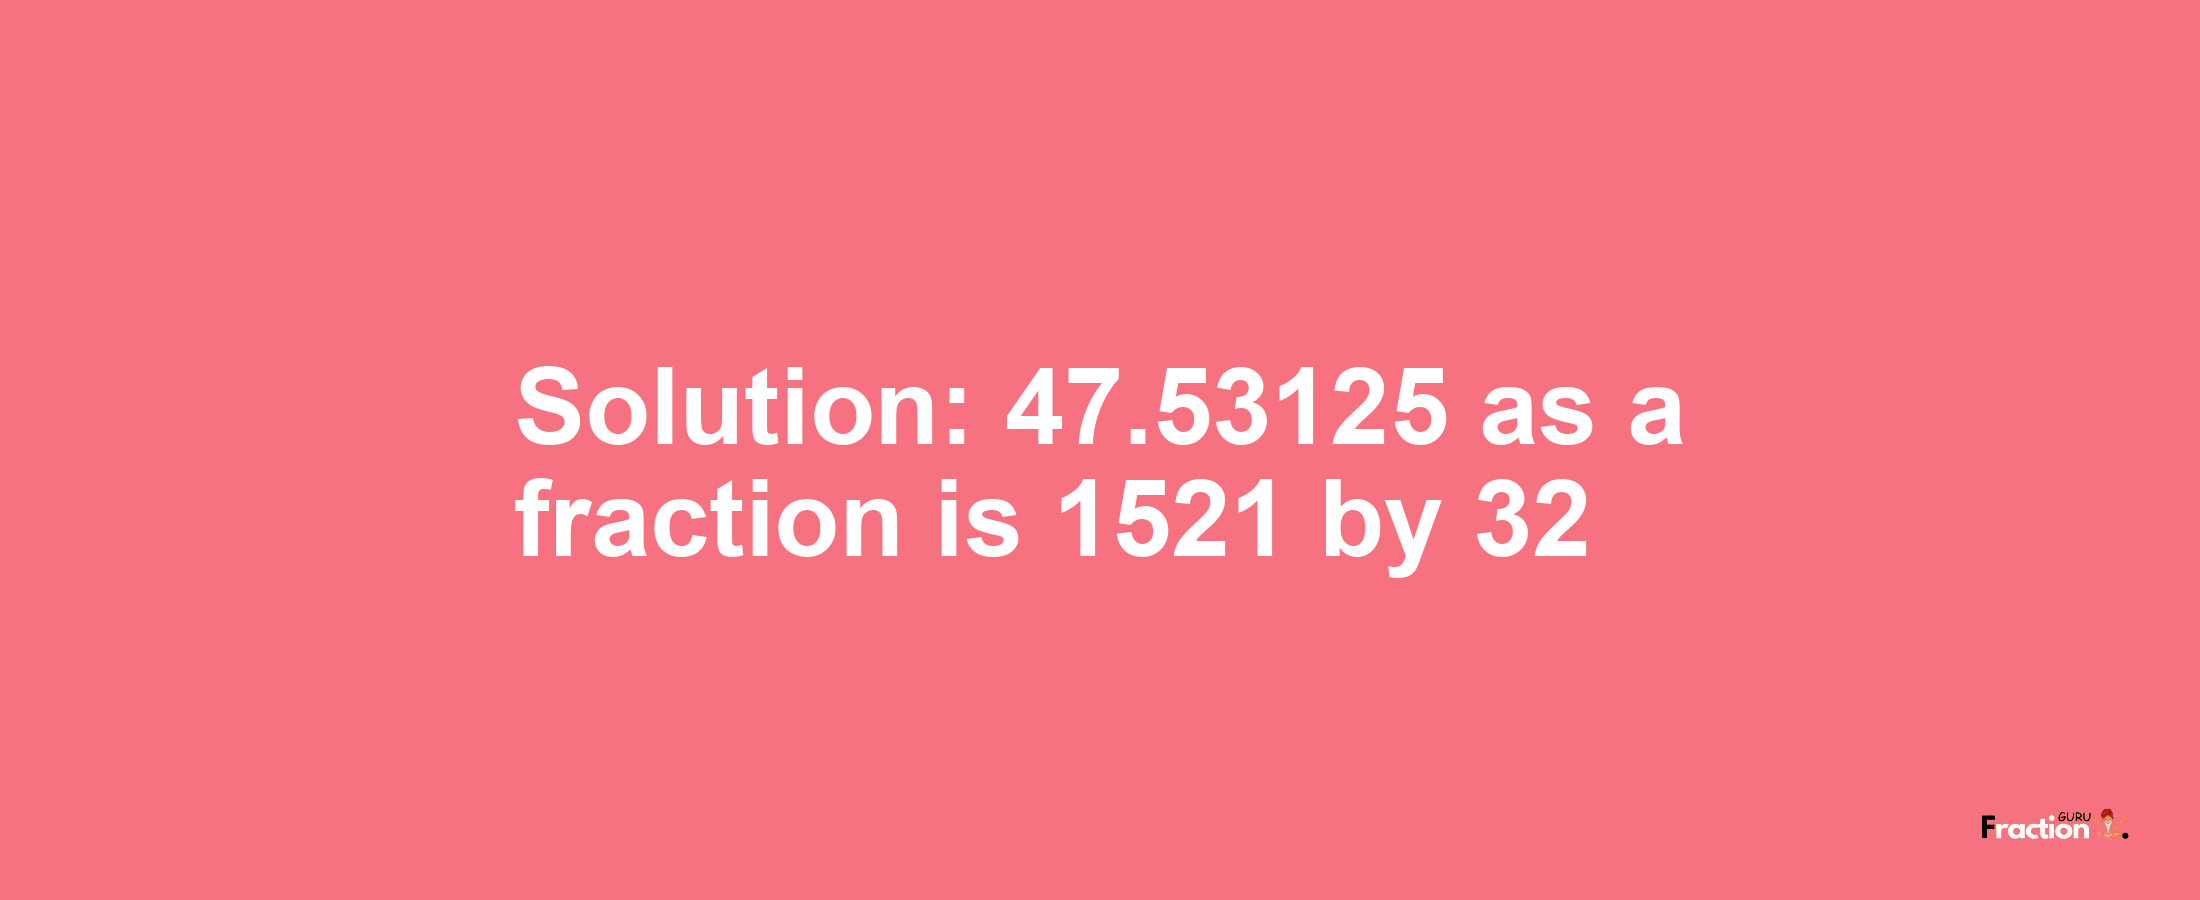 Solution:47.53125 as a fraction is 1521/32